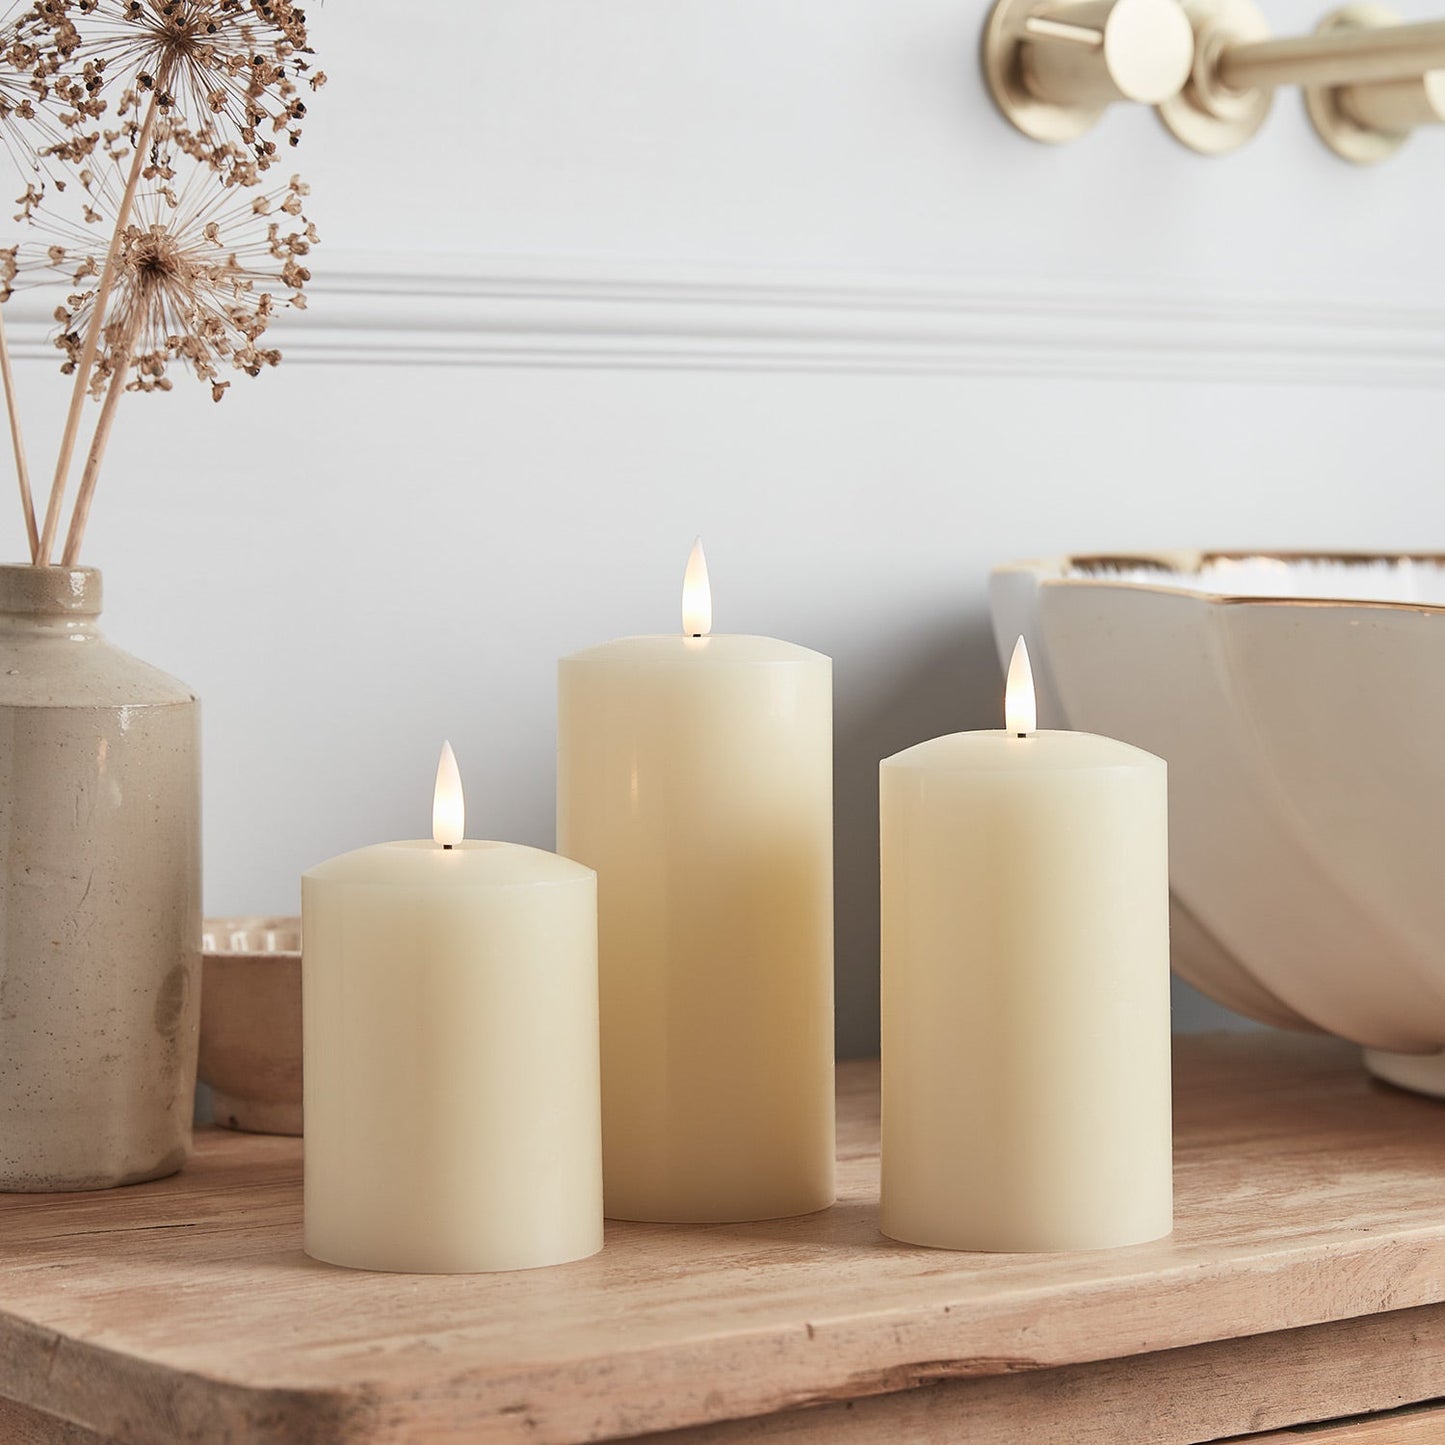 Genuine Ivory Wax Exterior Flickering Flame LED Pillar Candles